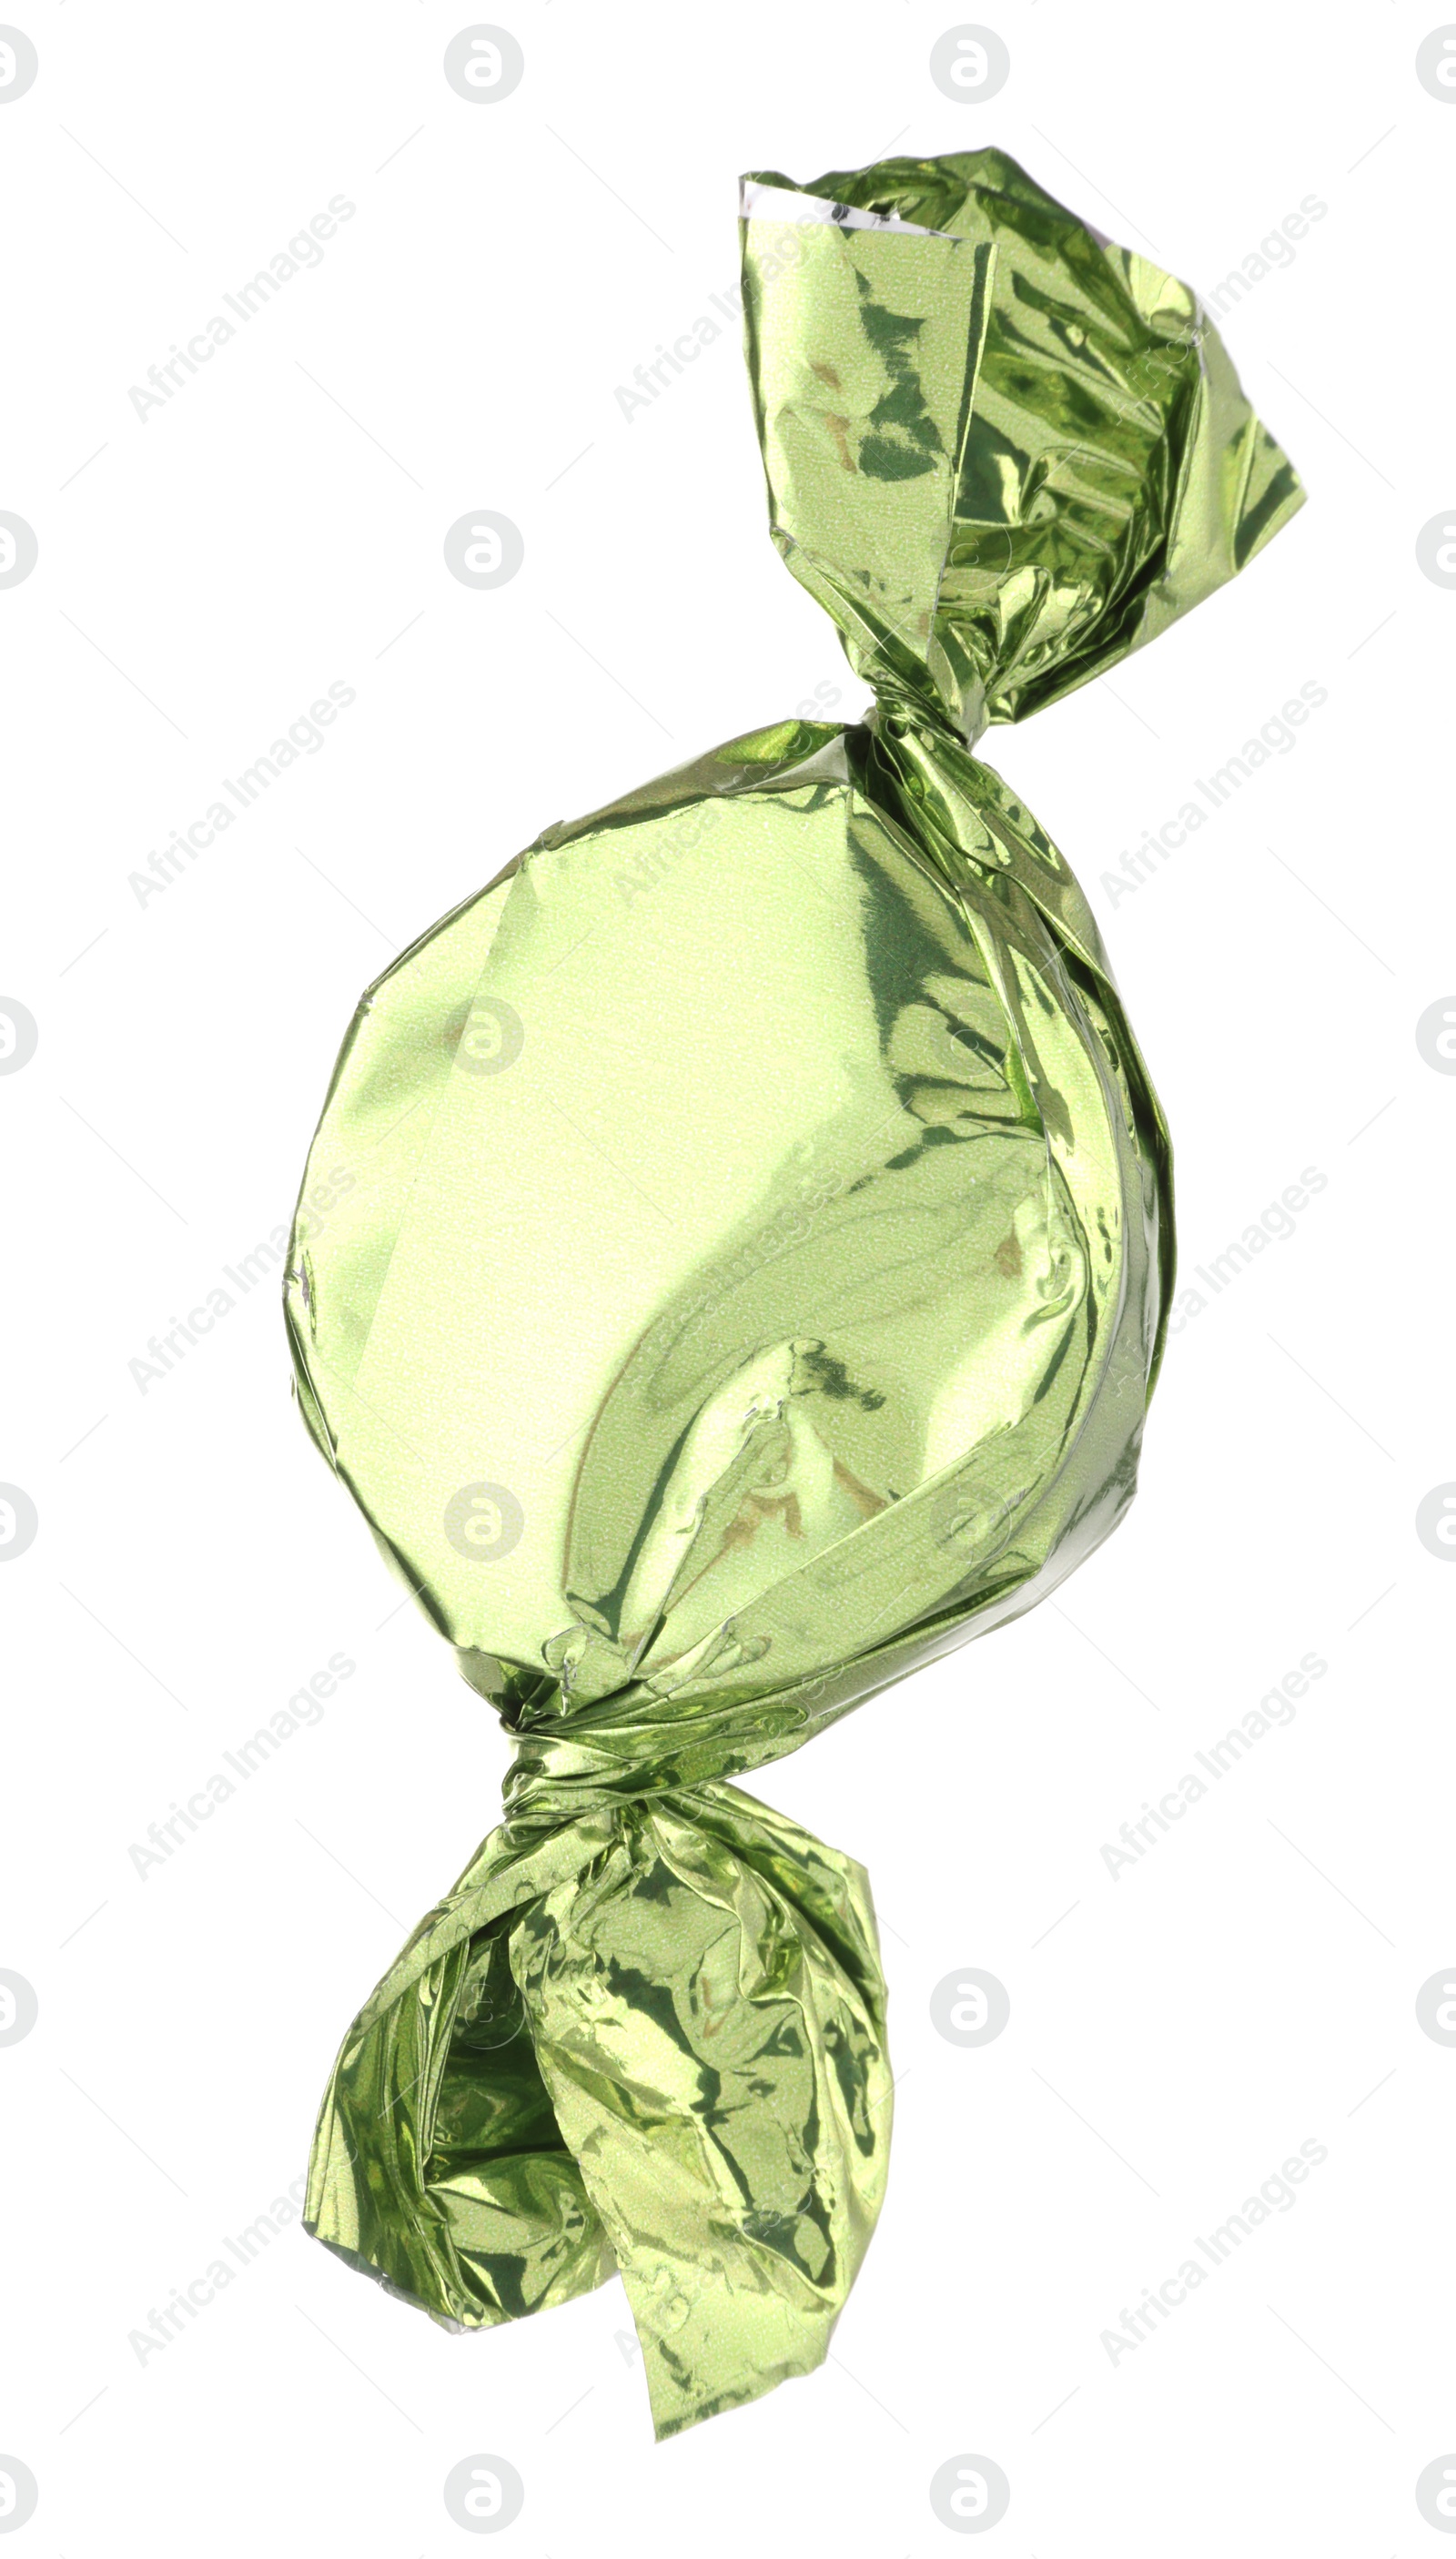 Photo of Candy in light green wrapper isolated on white